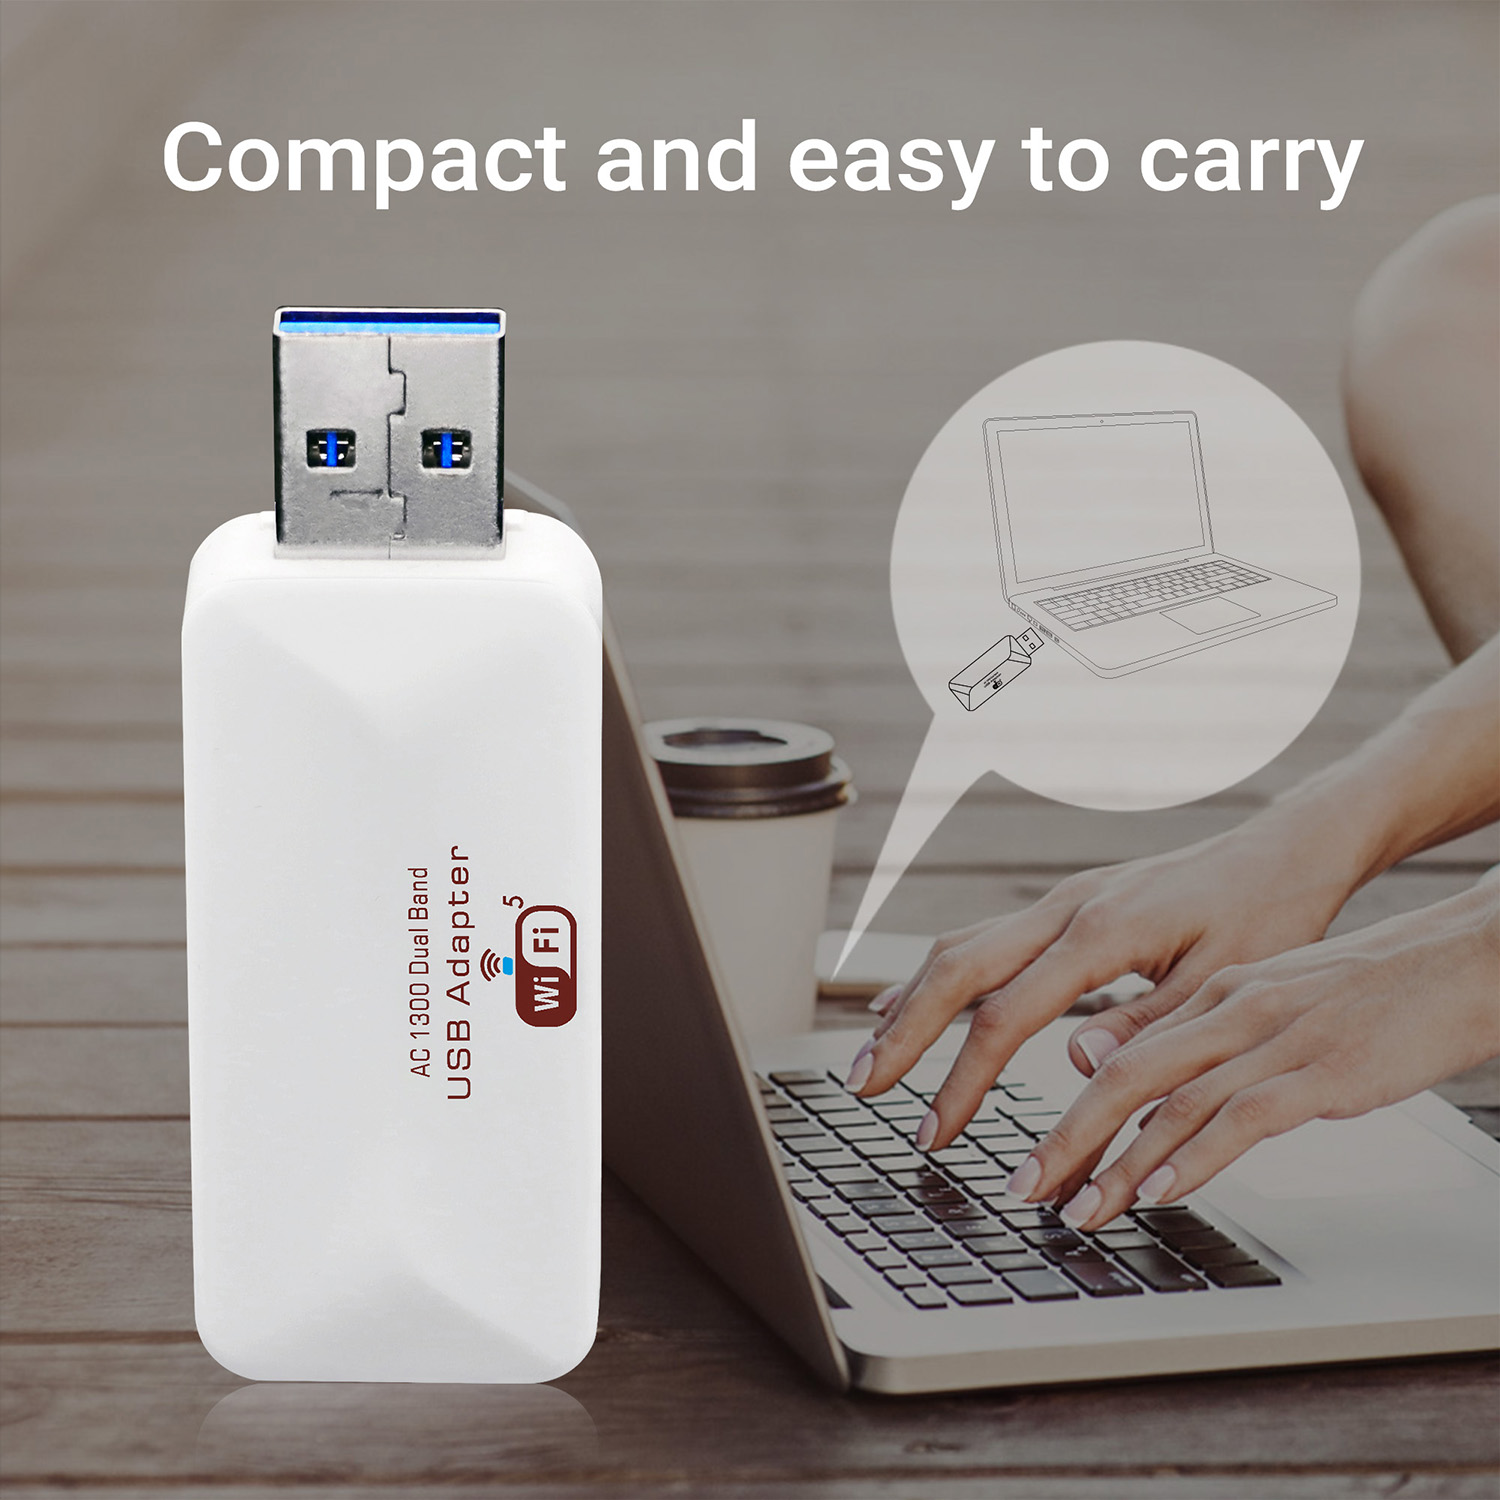 YINUO-LINK Presents the Y9 AC1300 Mini Wireless MU-MIMO USB Adapter: Unleash the Power of Dual Band Connectivity